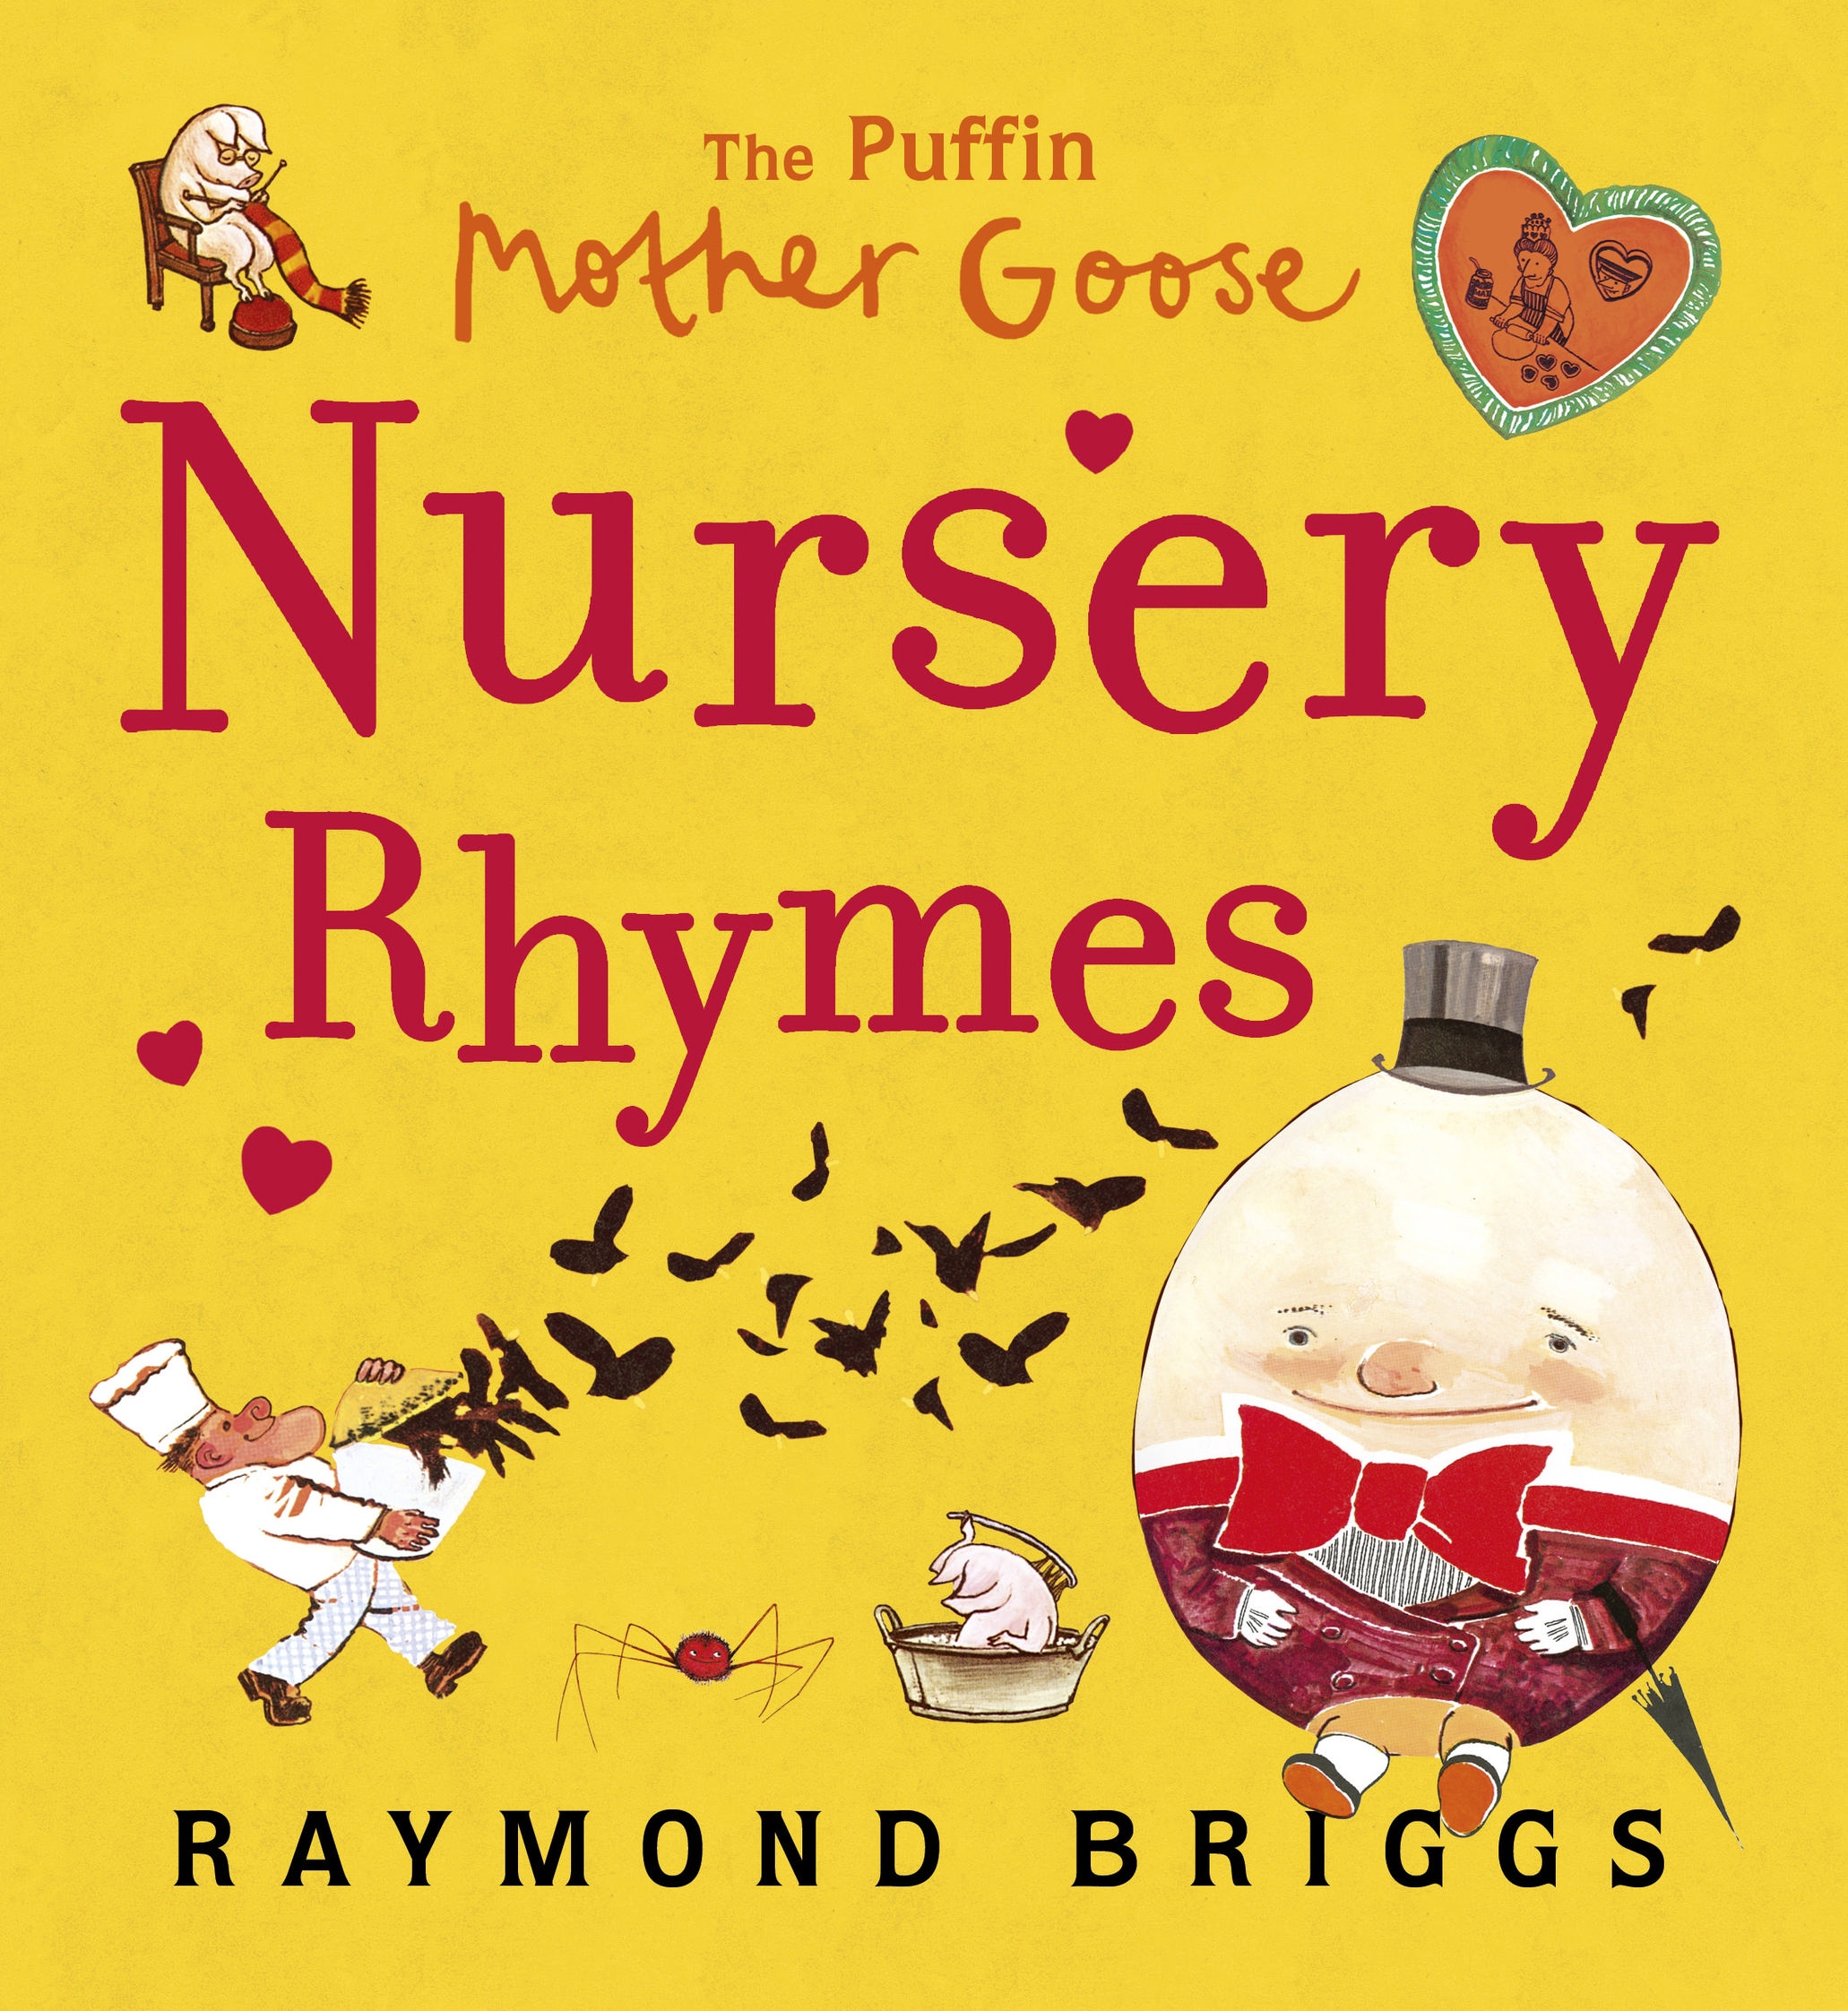 PUFFIN MOTHER GOOSE NURSERY RHYMES